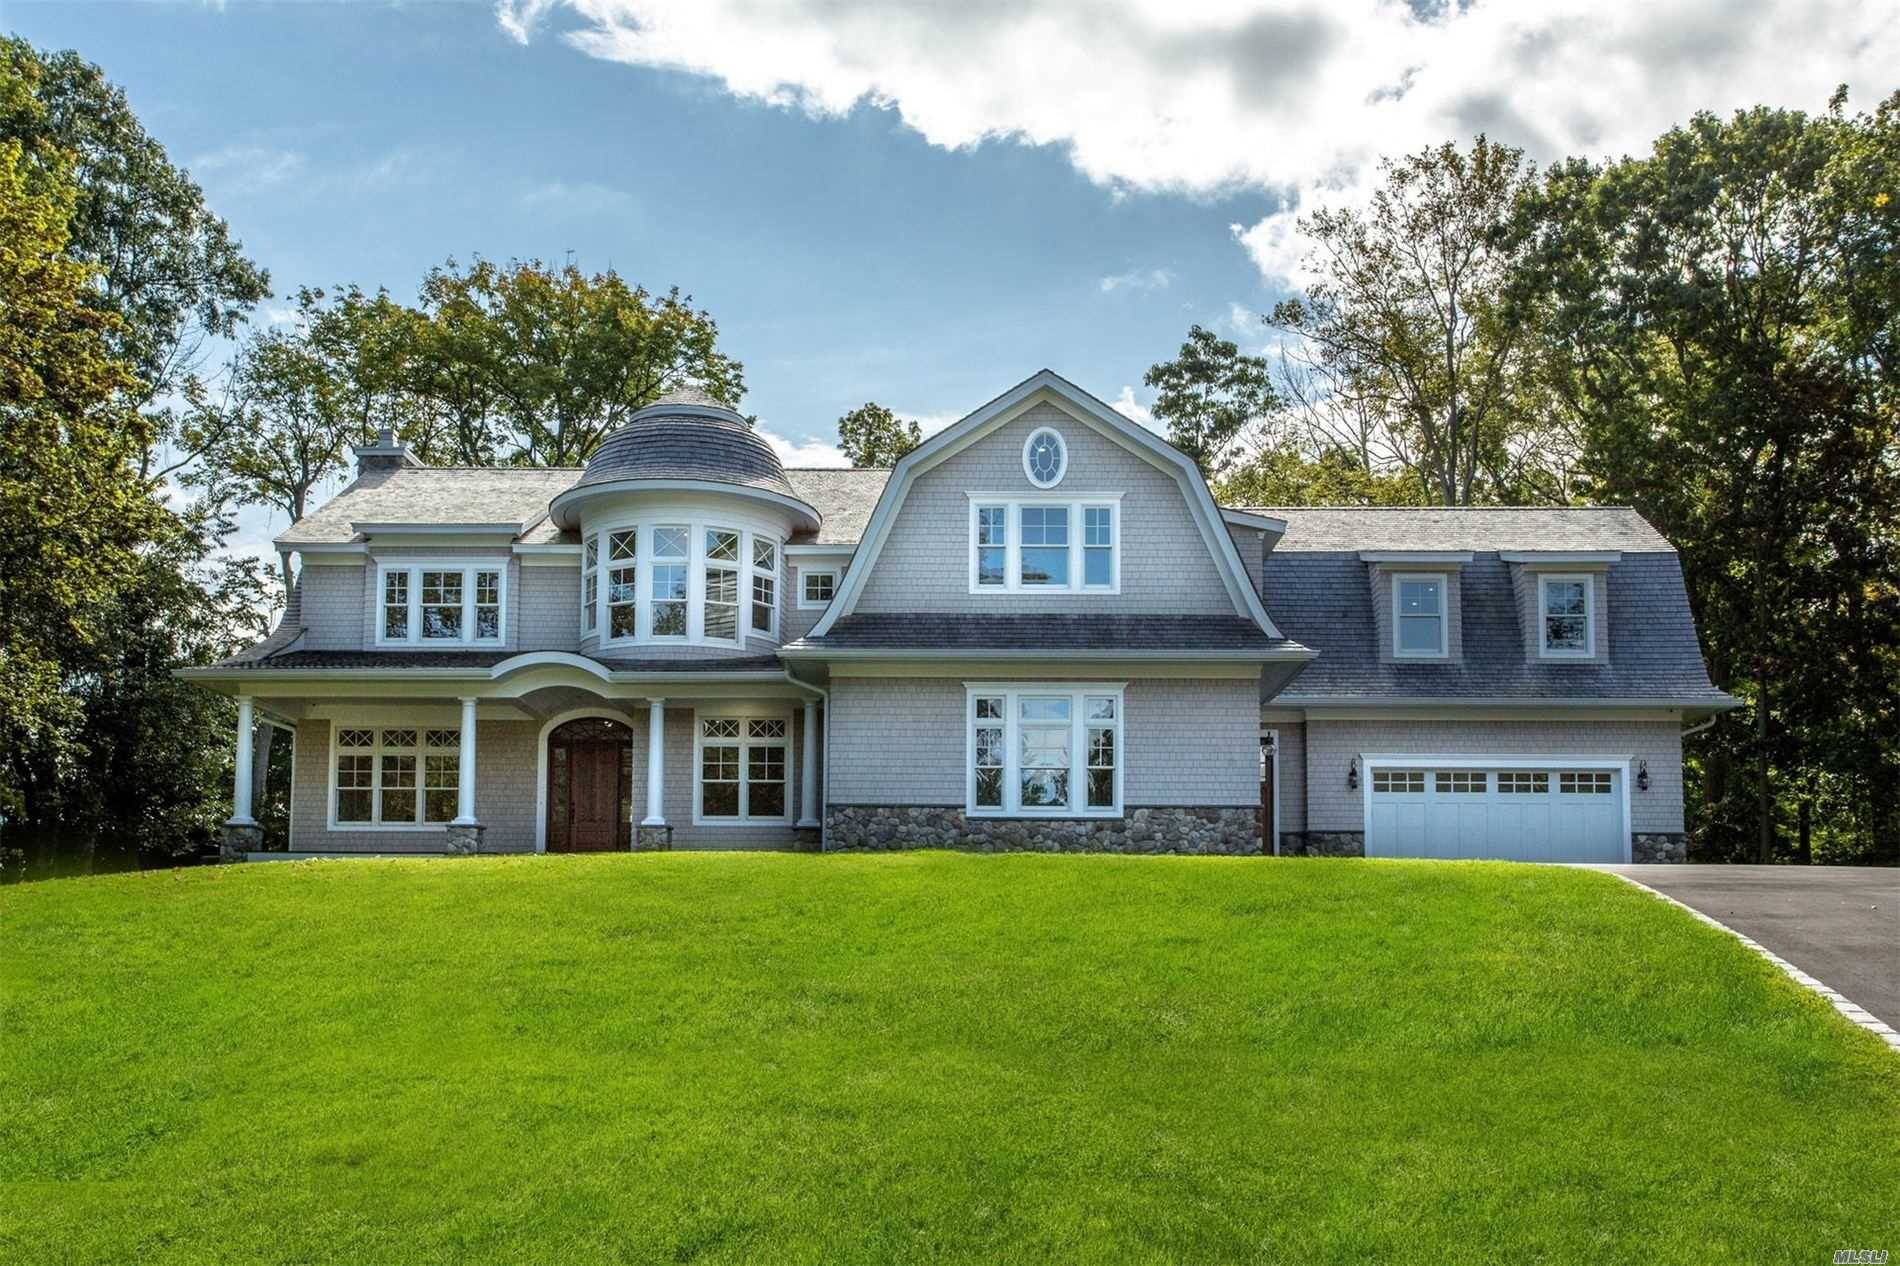 NEW CONSTRUCTION Thoughtfully Designed Gambrel Colonial On Lovely Janes Lane, High End Residence, No Expense Spared, Large Yet Intimate With Open Floor Plan.